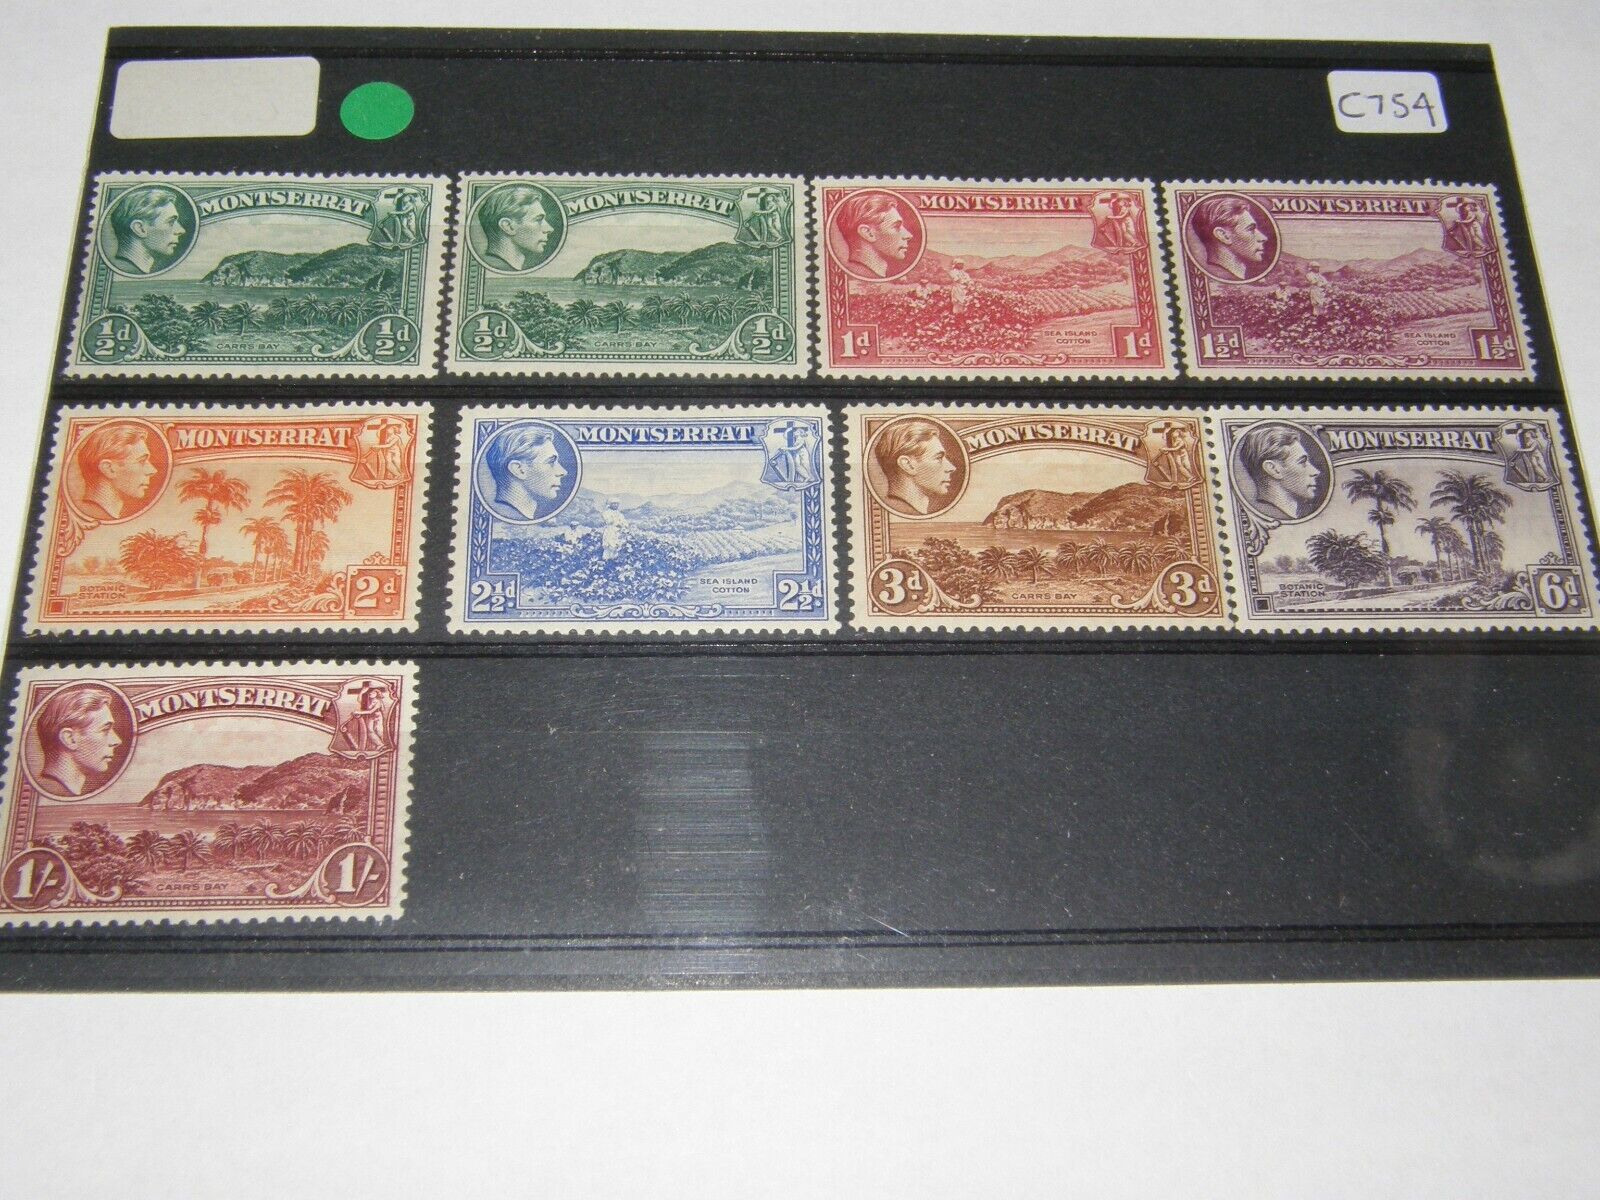 C754 MONTSERRAT K.G.VI Award 1938 Outlet ☆ Free Shipping MINT STAMPS MOUNTED